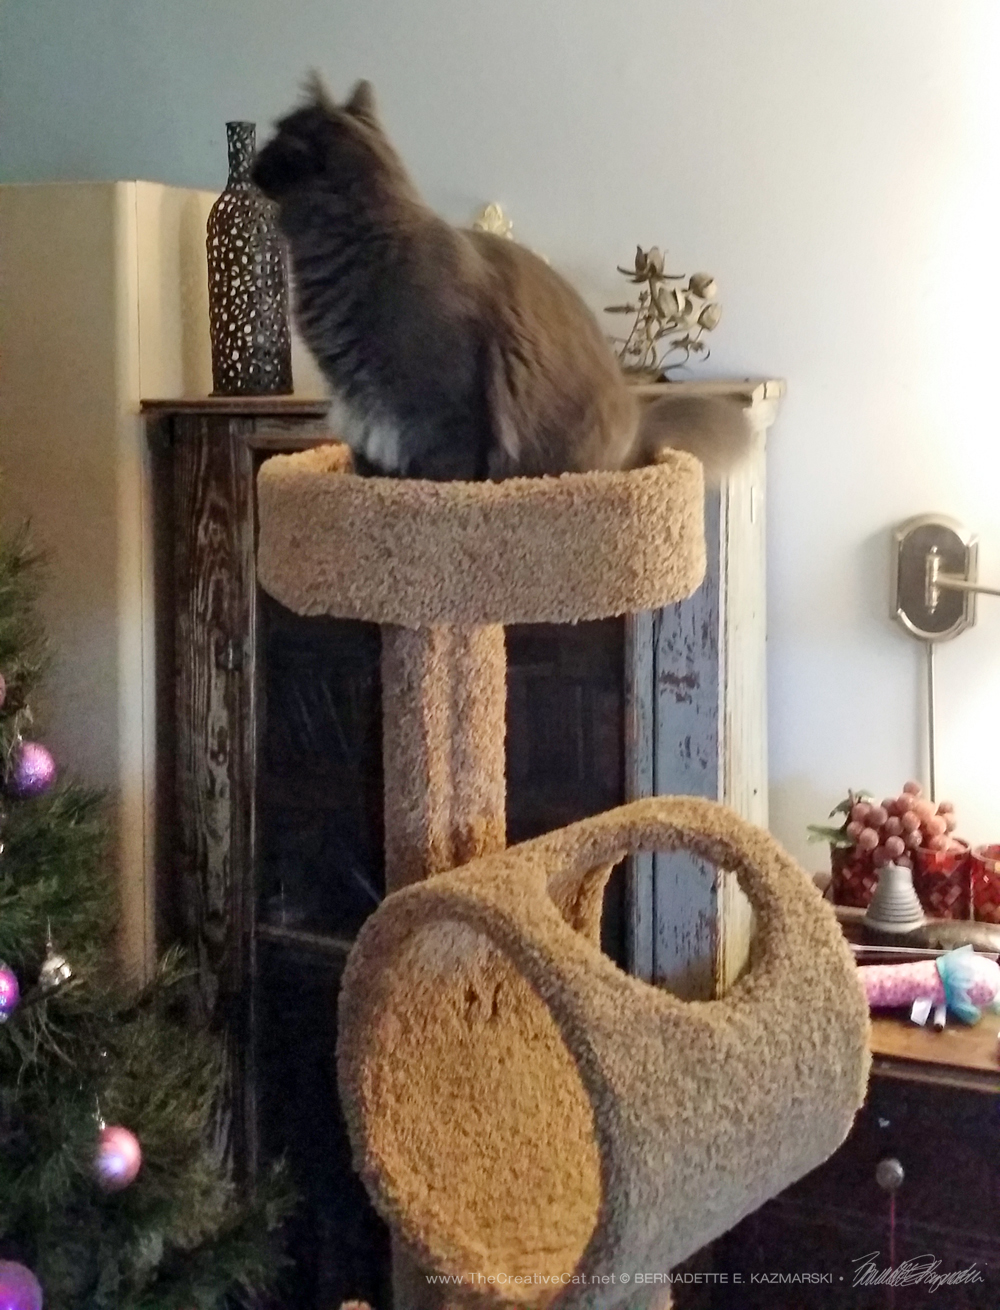 Teddy discovers the cat tree and the Christmas tree.